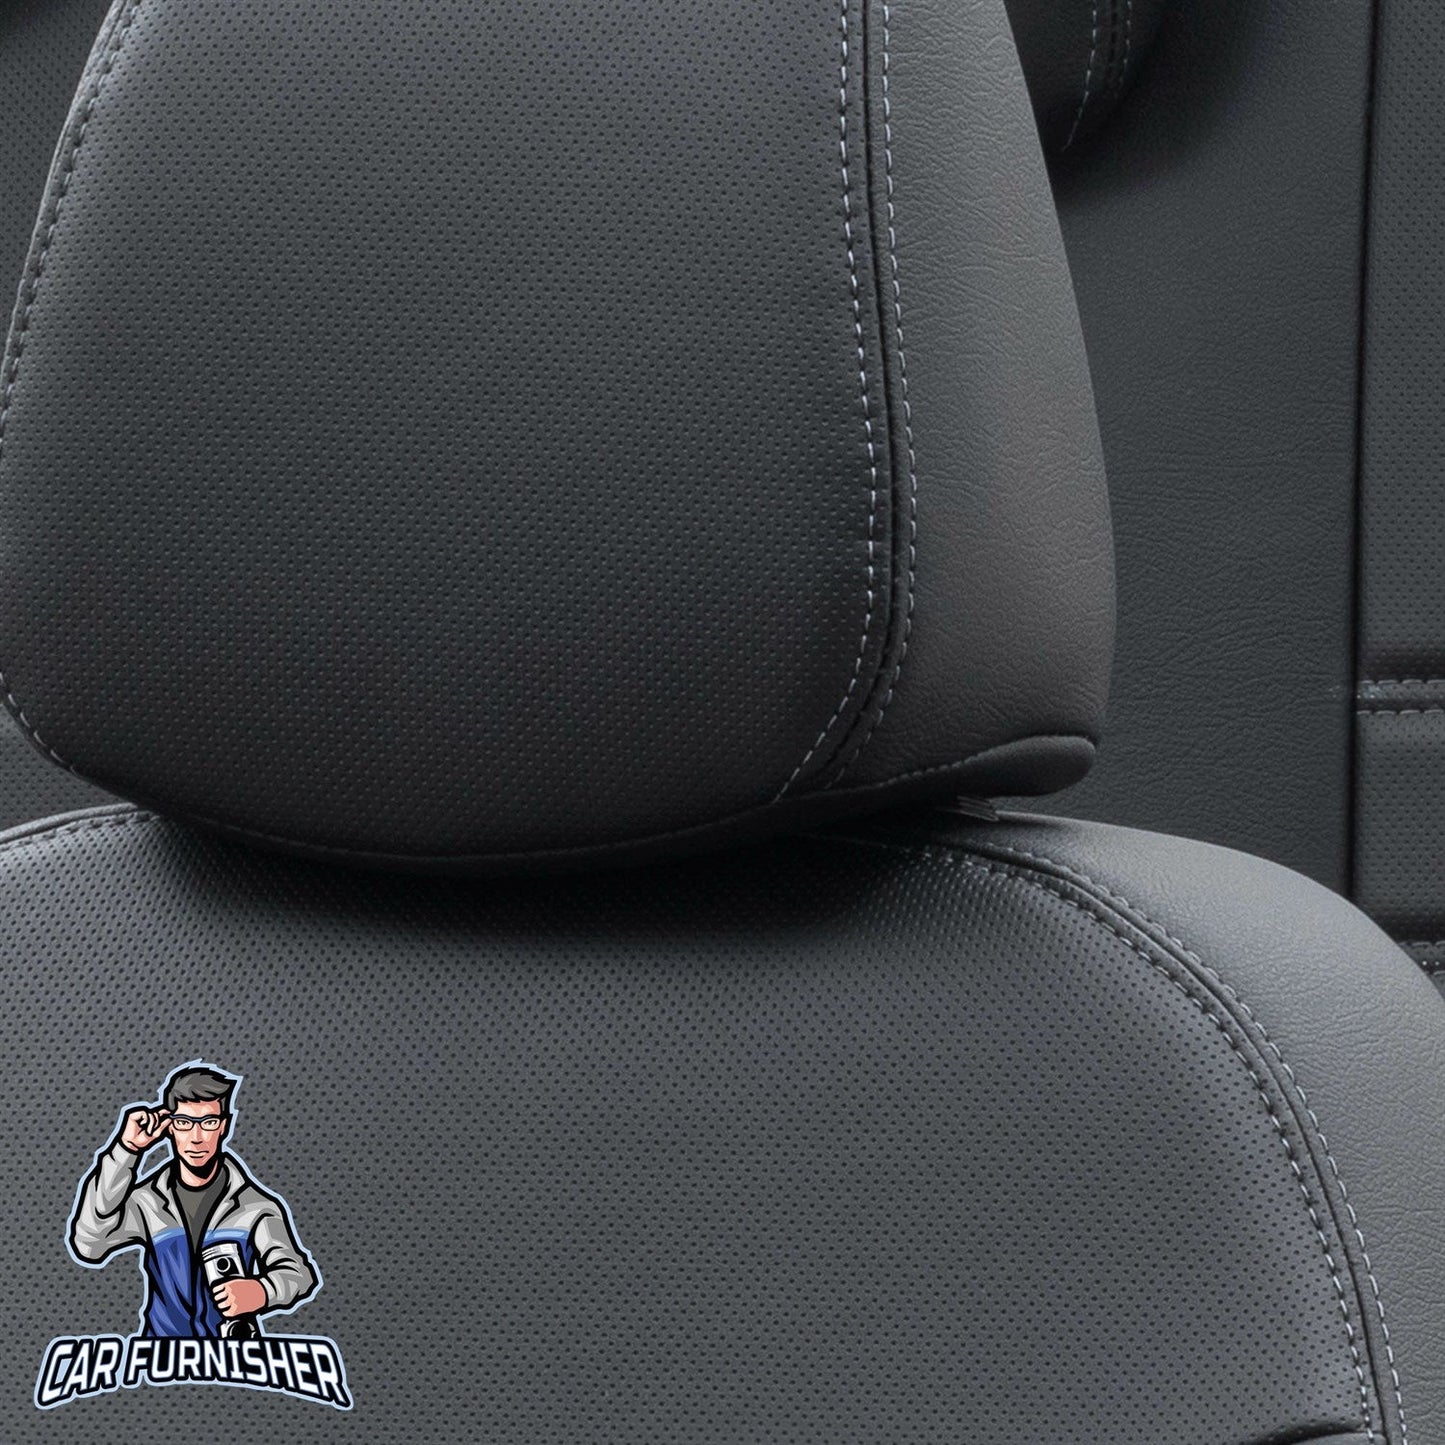 Mercedes Citan Seat Covers Istanbul Leather Design Black Leather